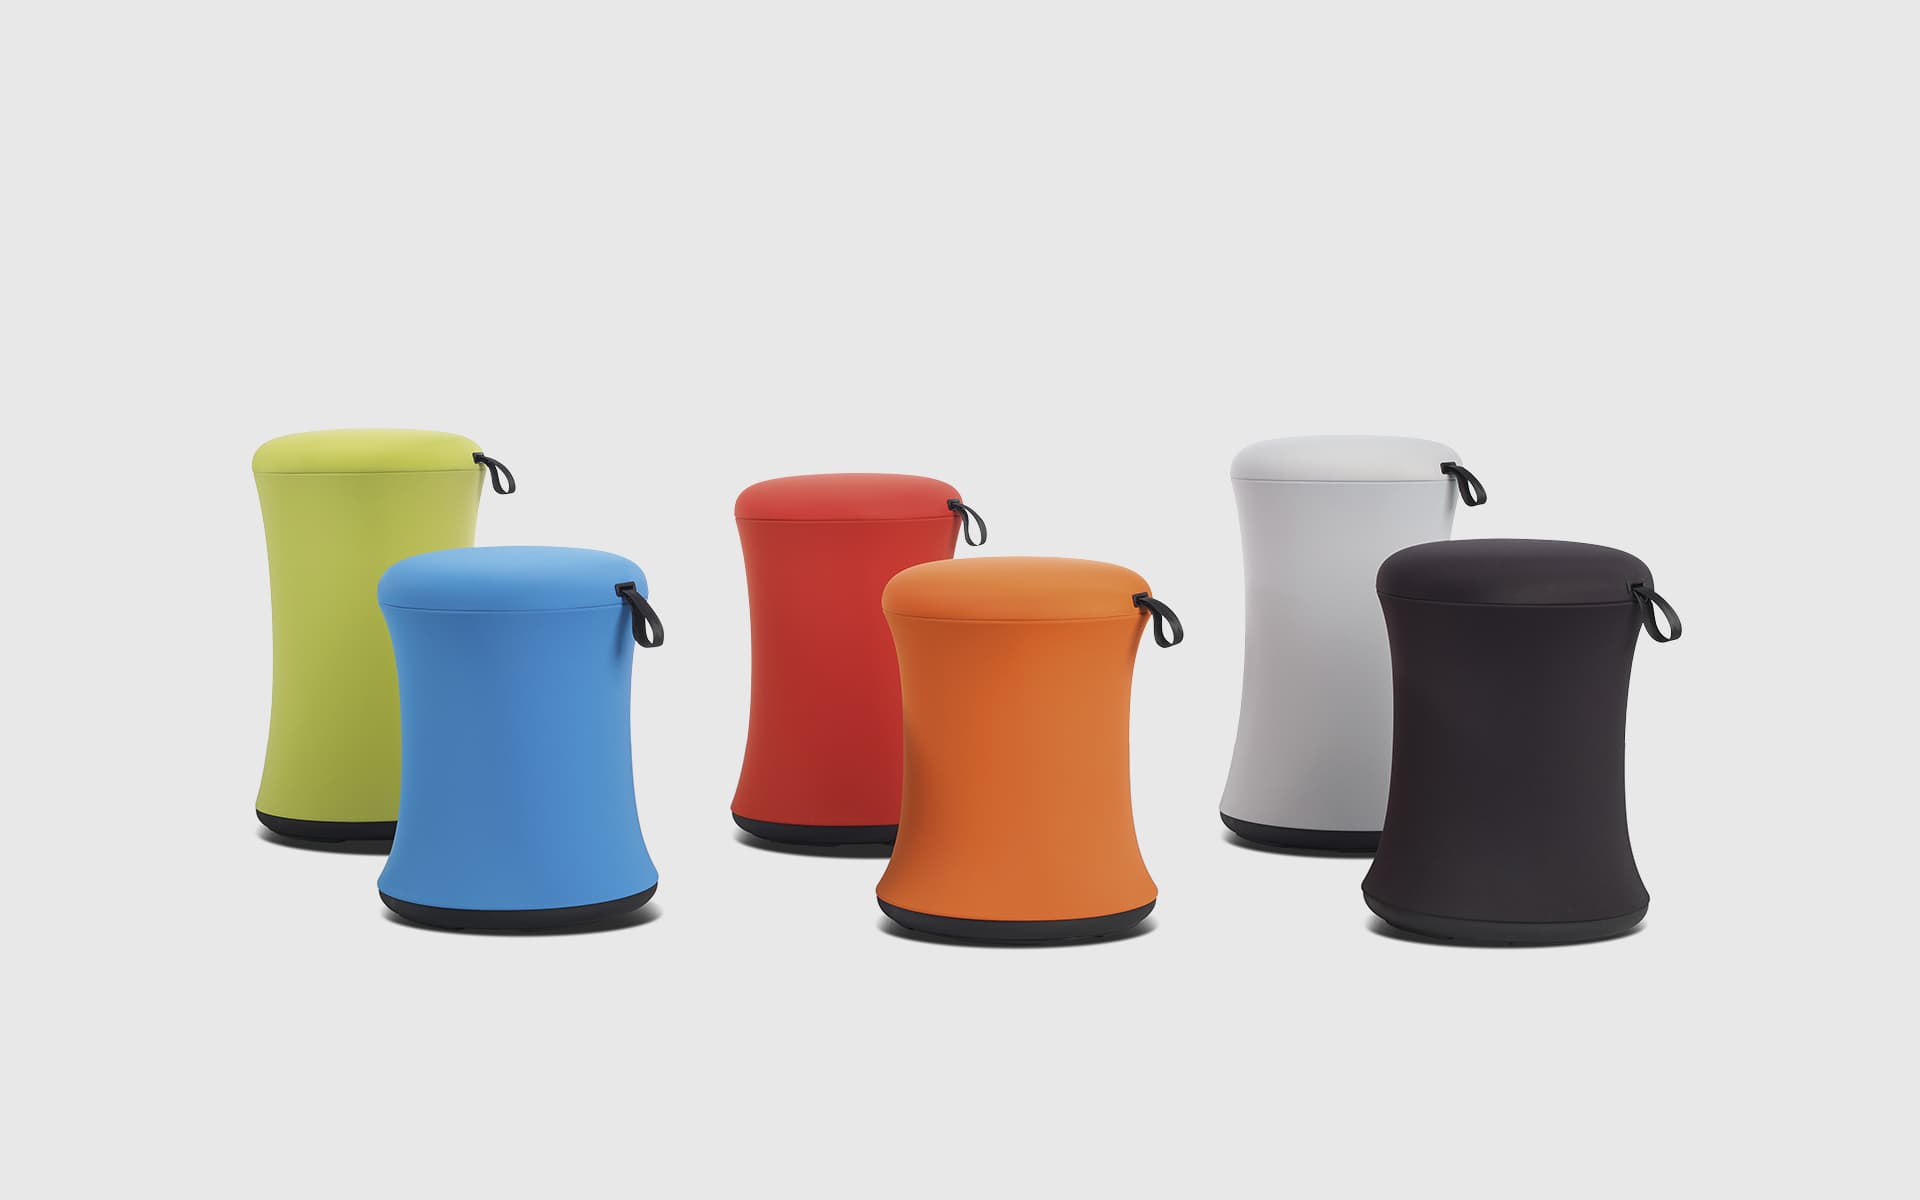 Six Uebobo stools, designed by ITO Design, in light green, light blue, bright red, orange, light grey and black